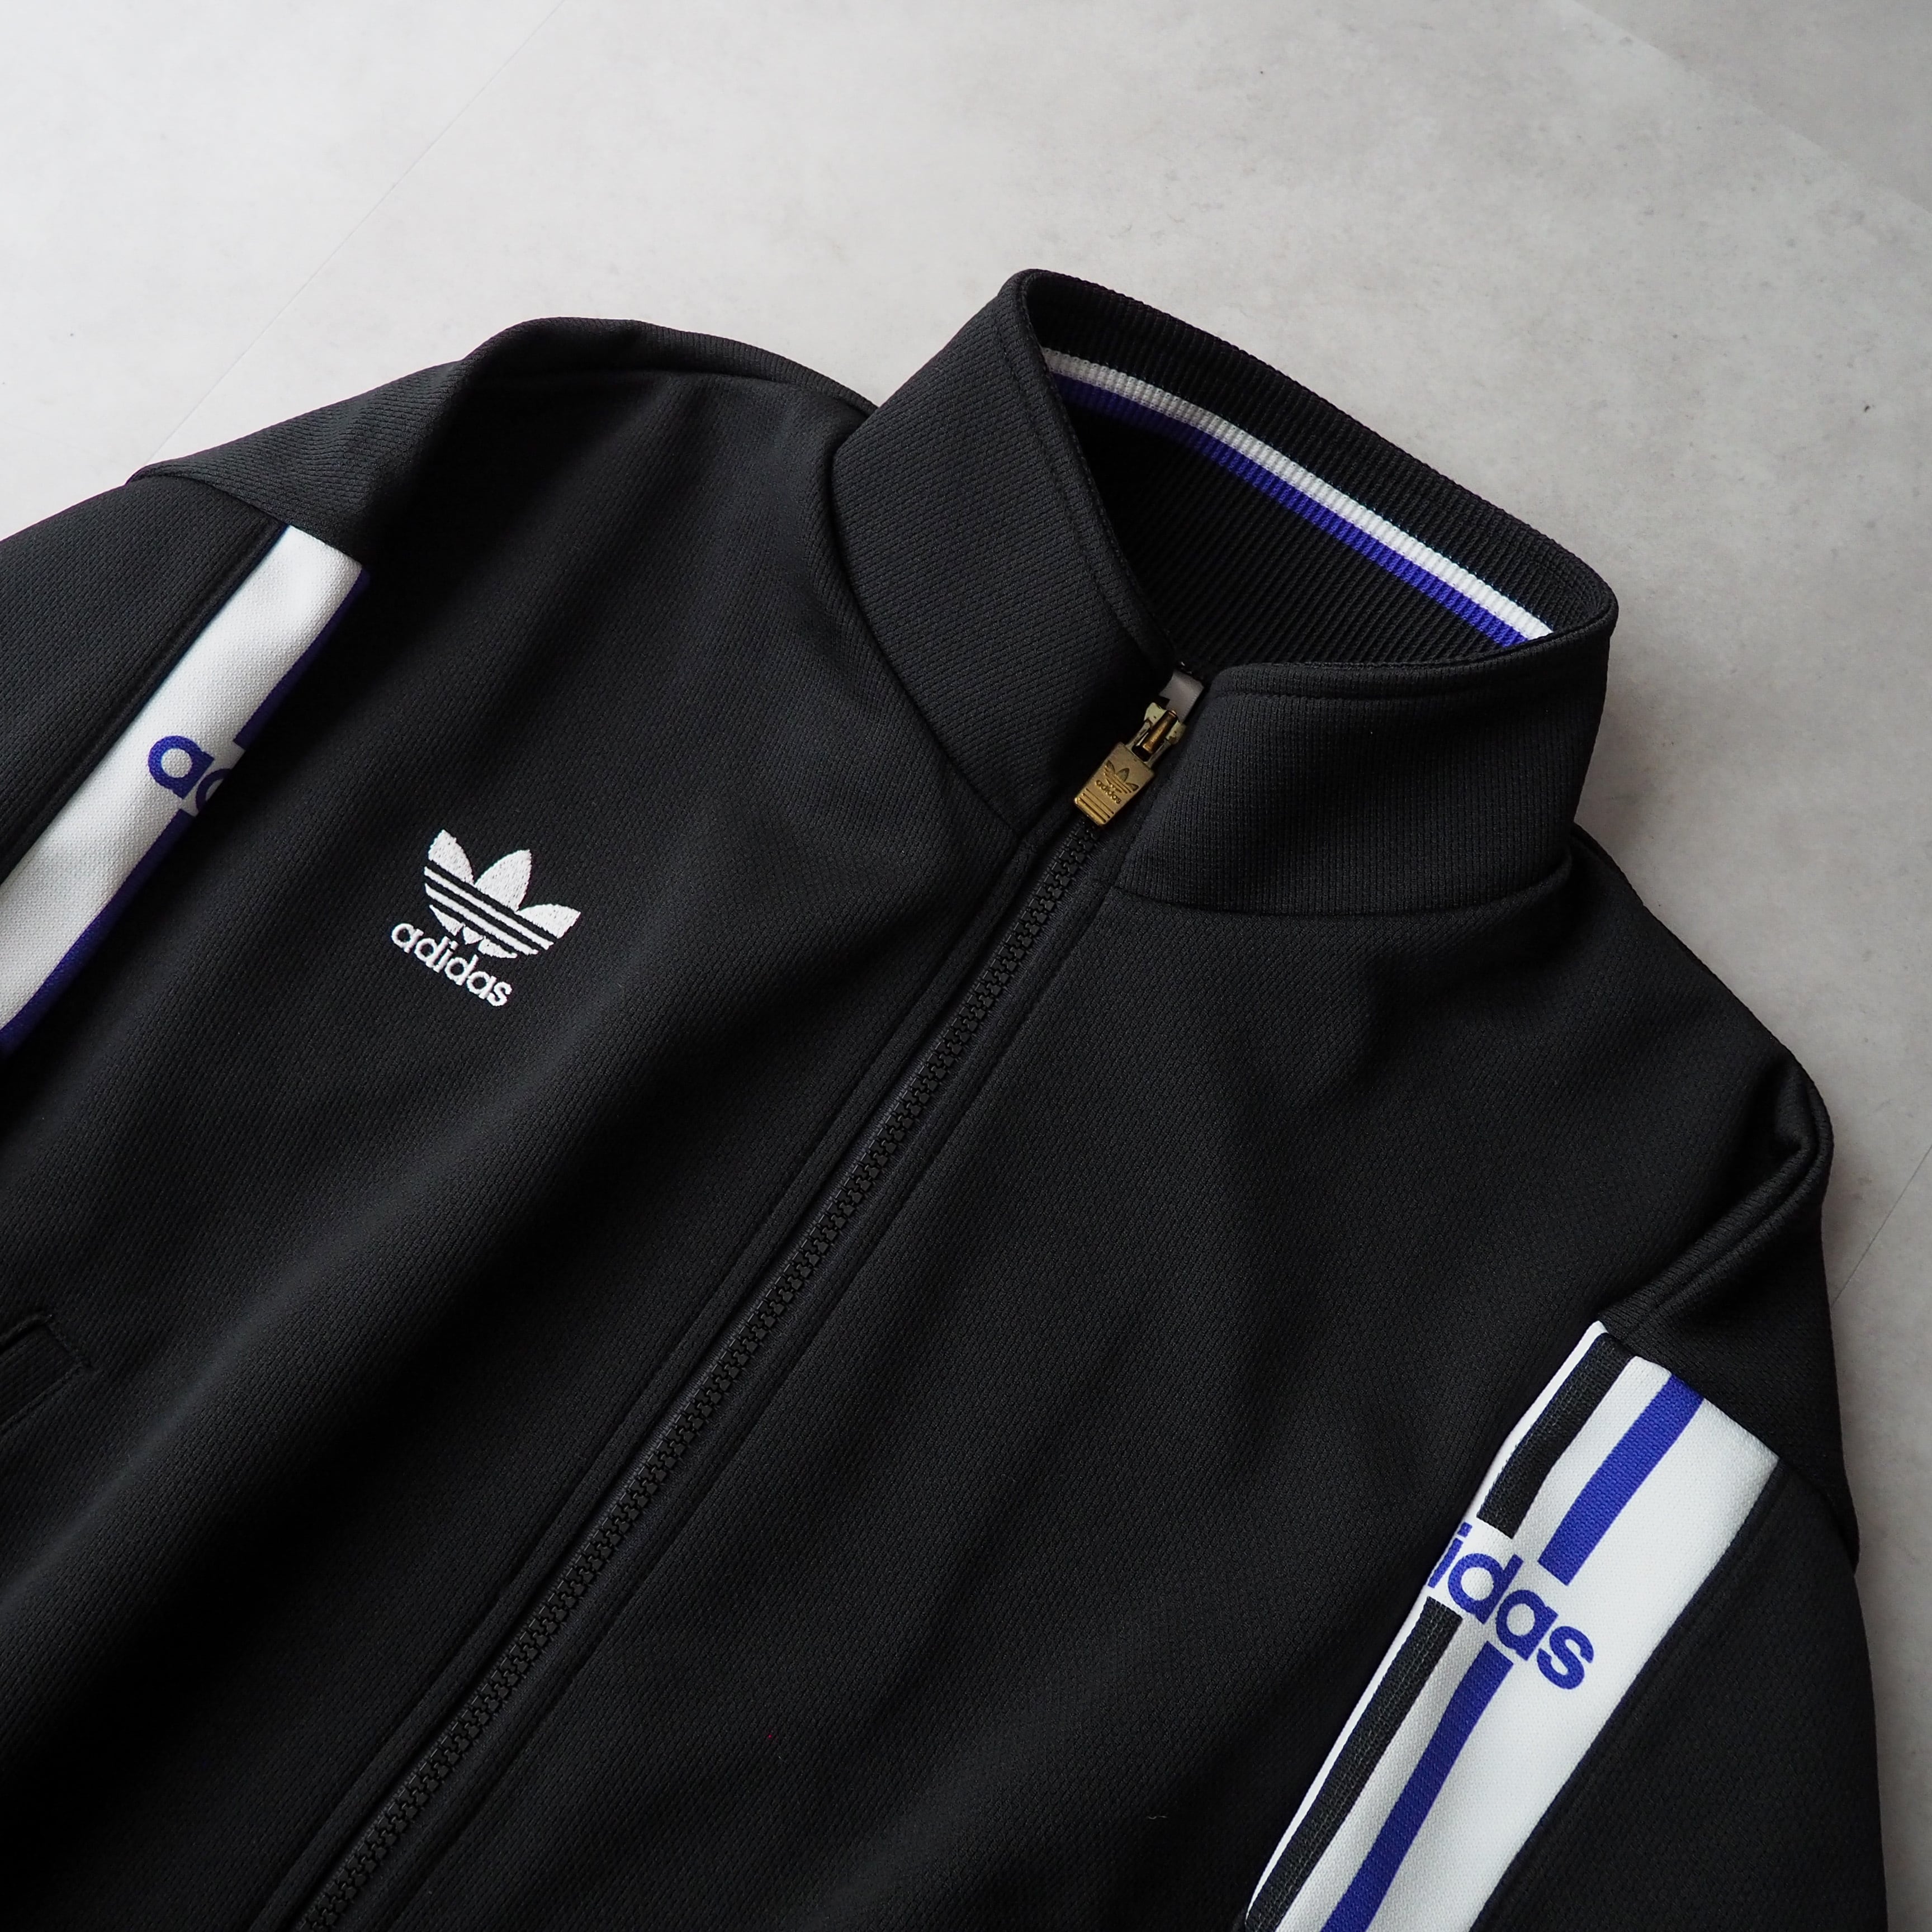 80s-90s “ADIDAS” by DESCENTE track jacket & pants set up 80年代 90 